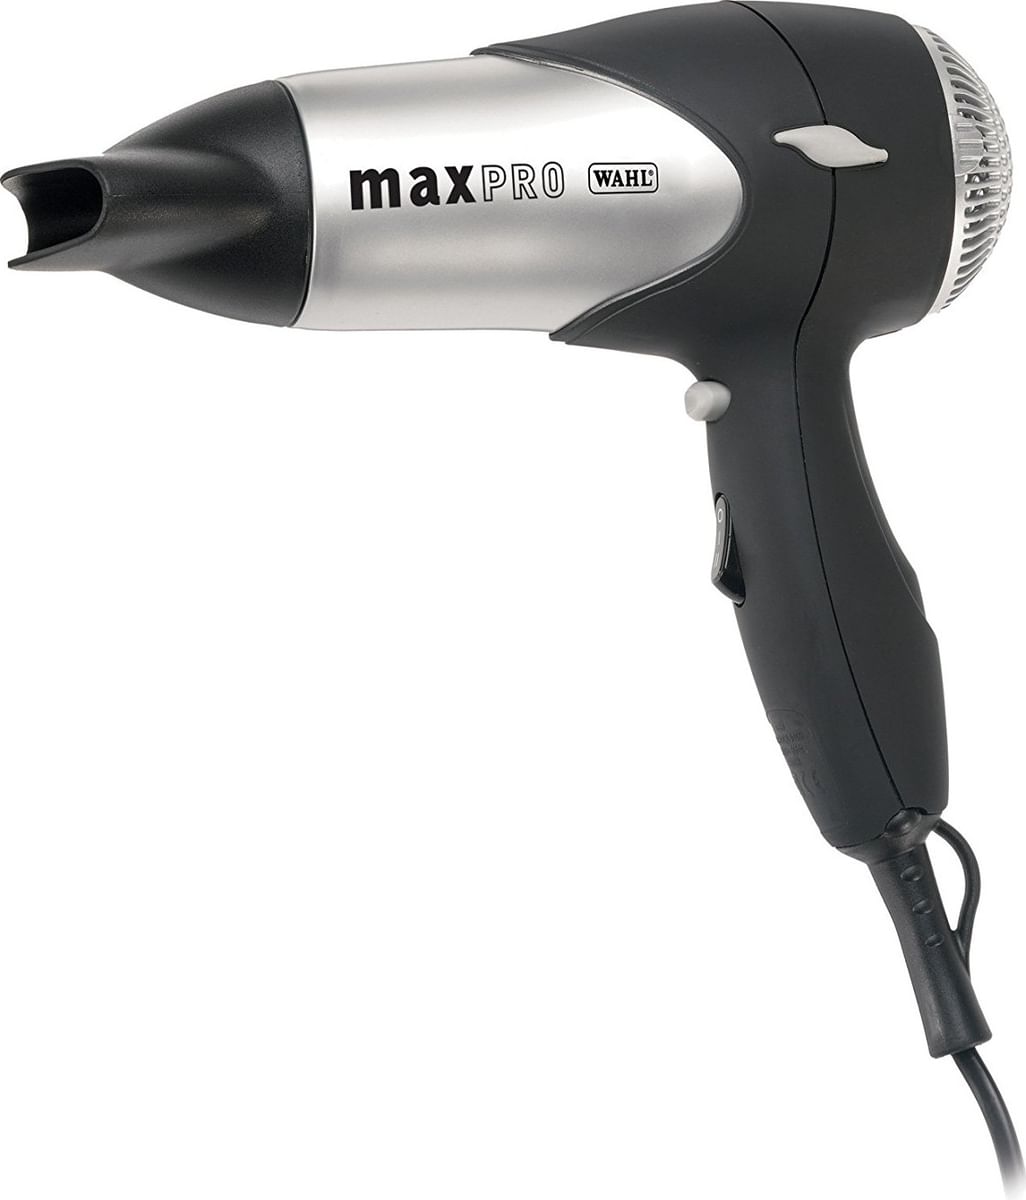 Wahl Hair Dryers Price List in India | Smartprix